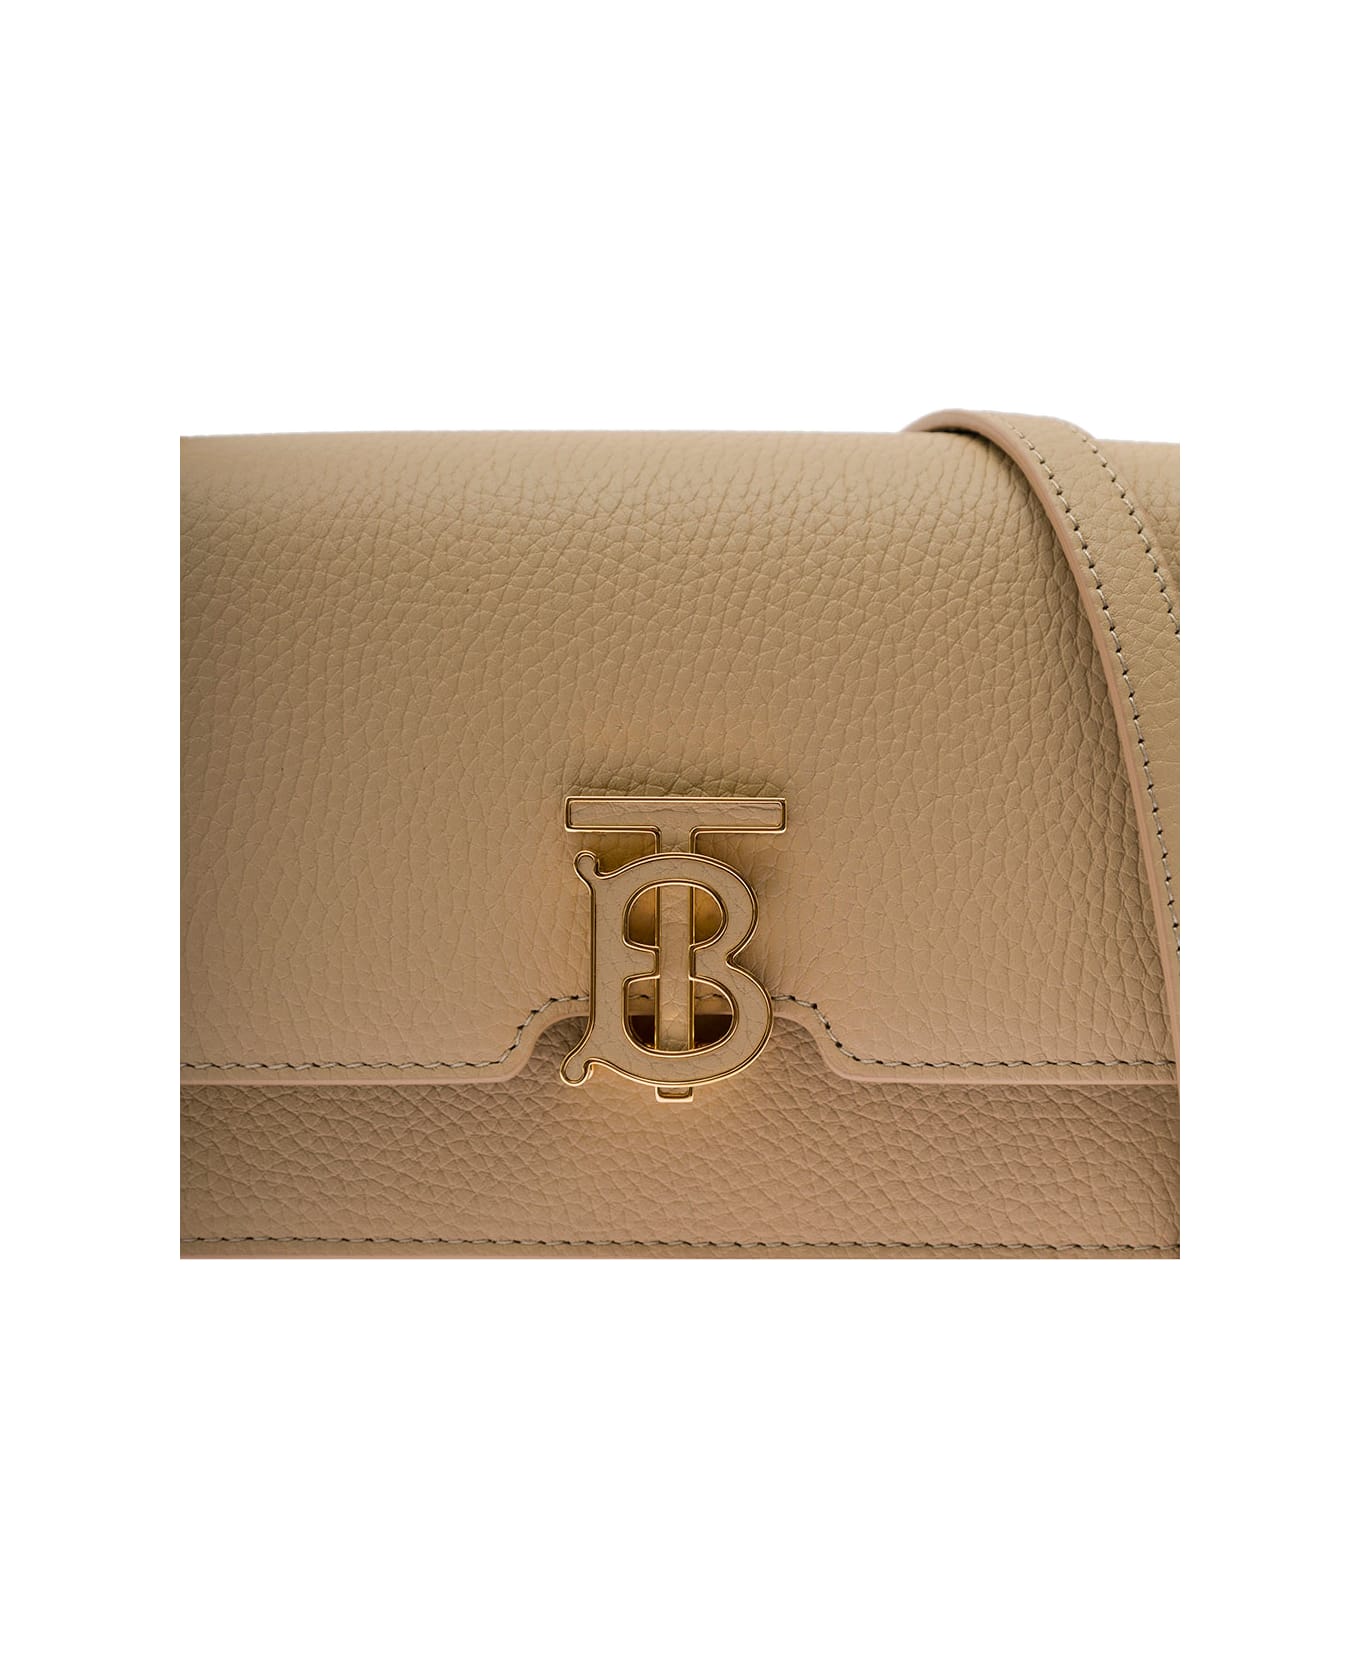 Burberry Beige Shoulder Bag With Tonal Tb Logo In Grainy Leather Woman - Nude & Neutrals